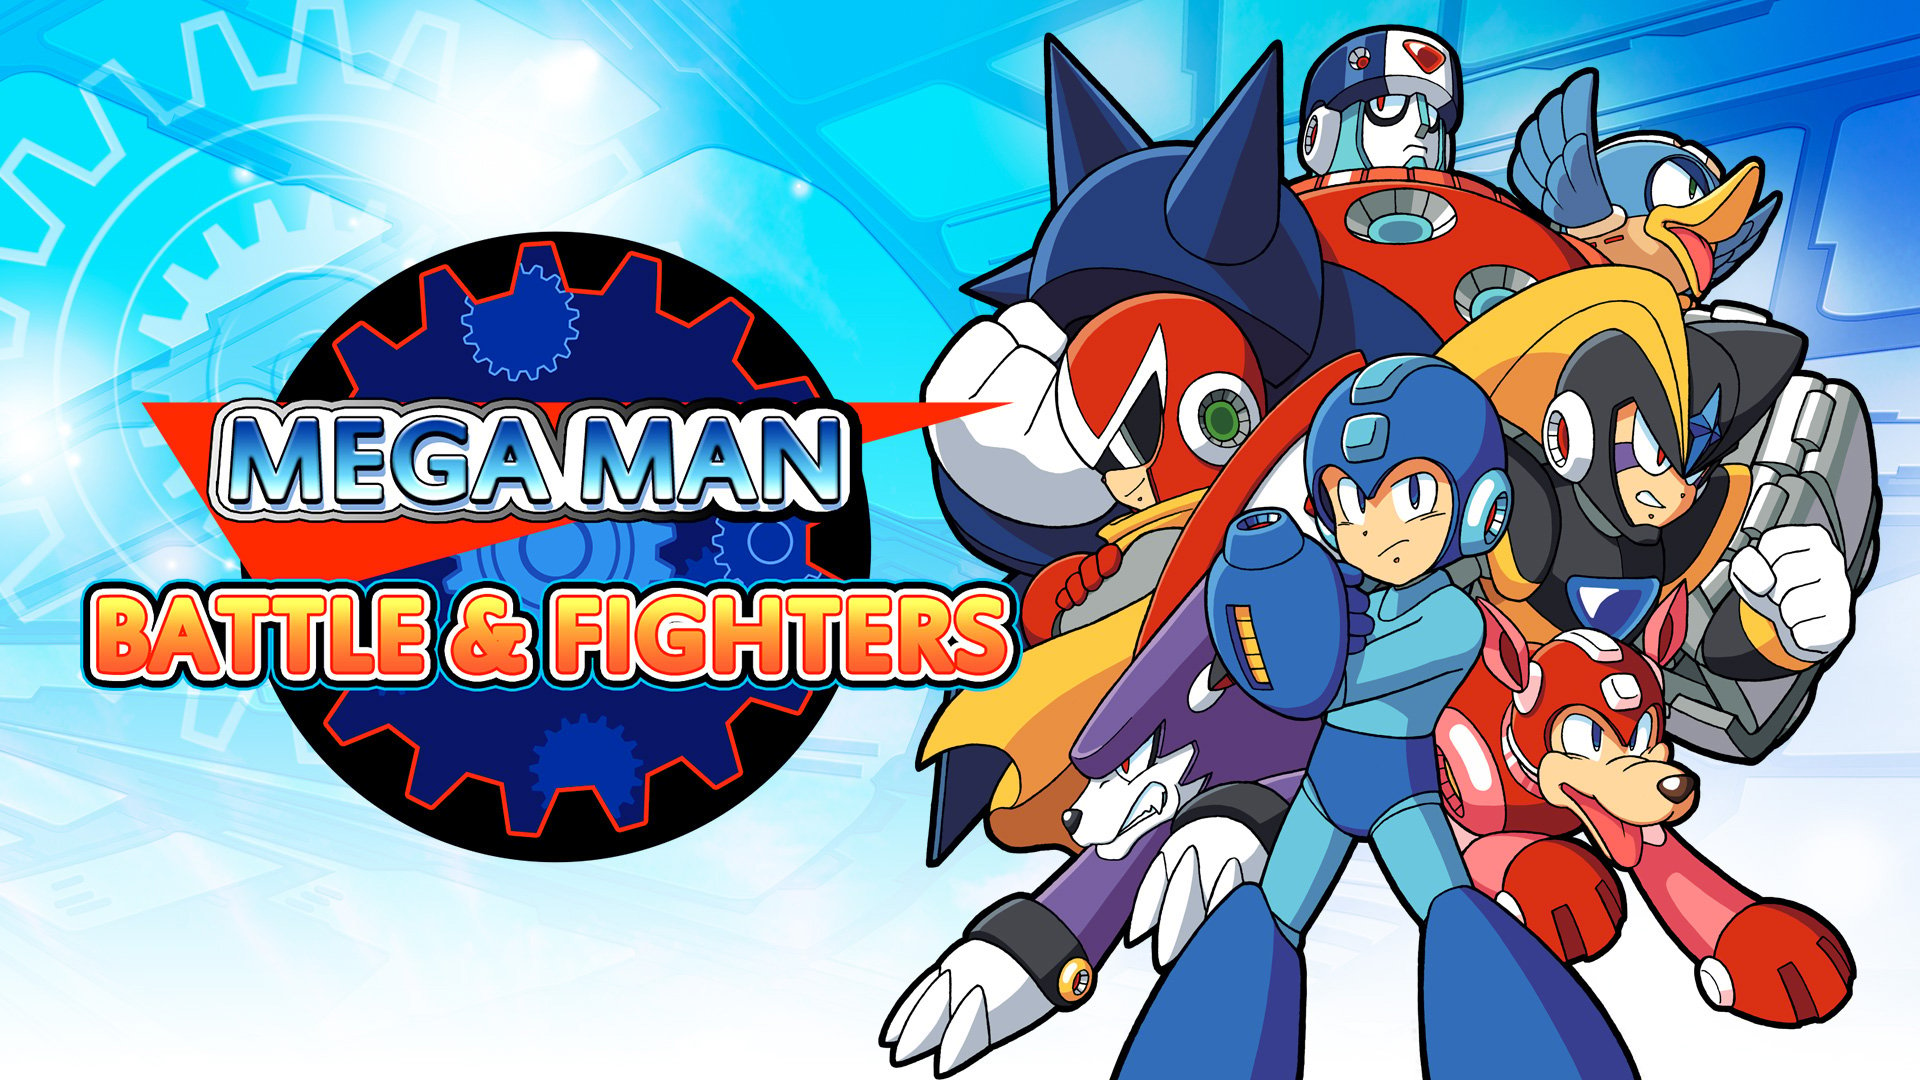 SNK-developed Mega Man Battle & Fighters now available for Switch - Gematsu